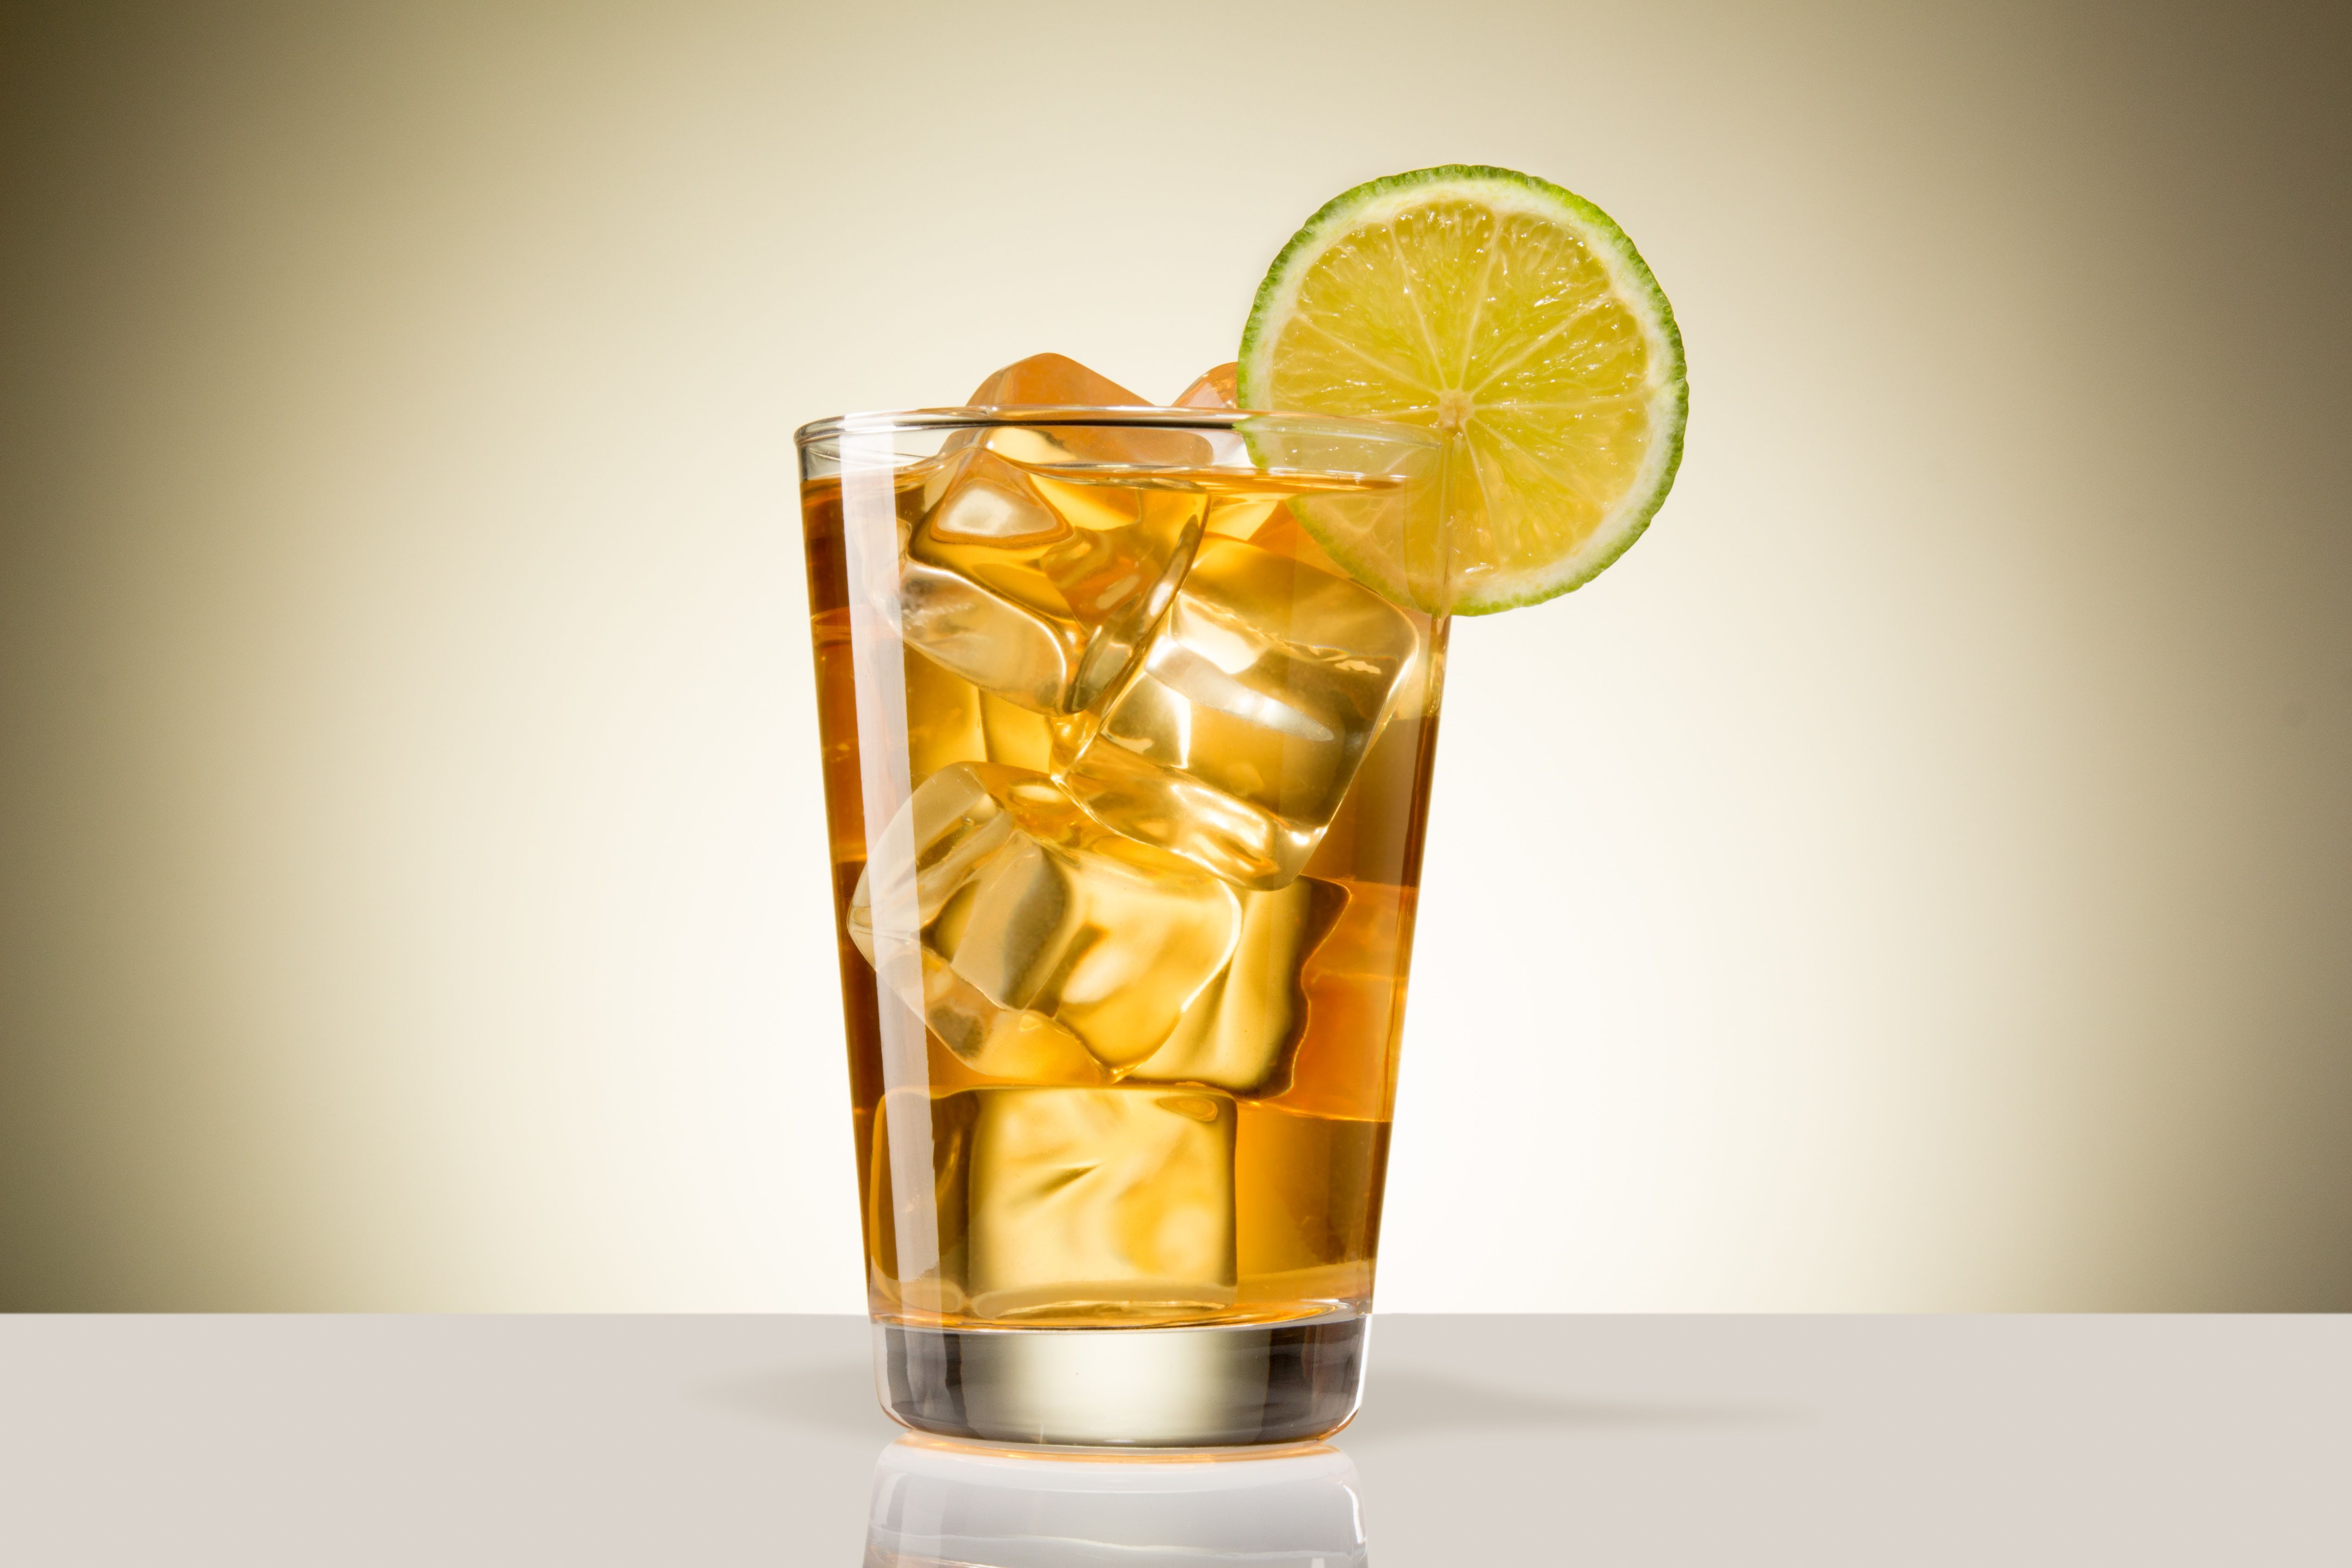 10 Best Iced Tea Brands, Recommended By Experts